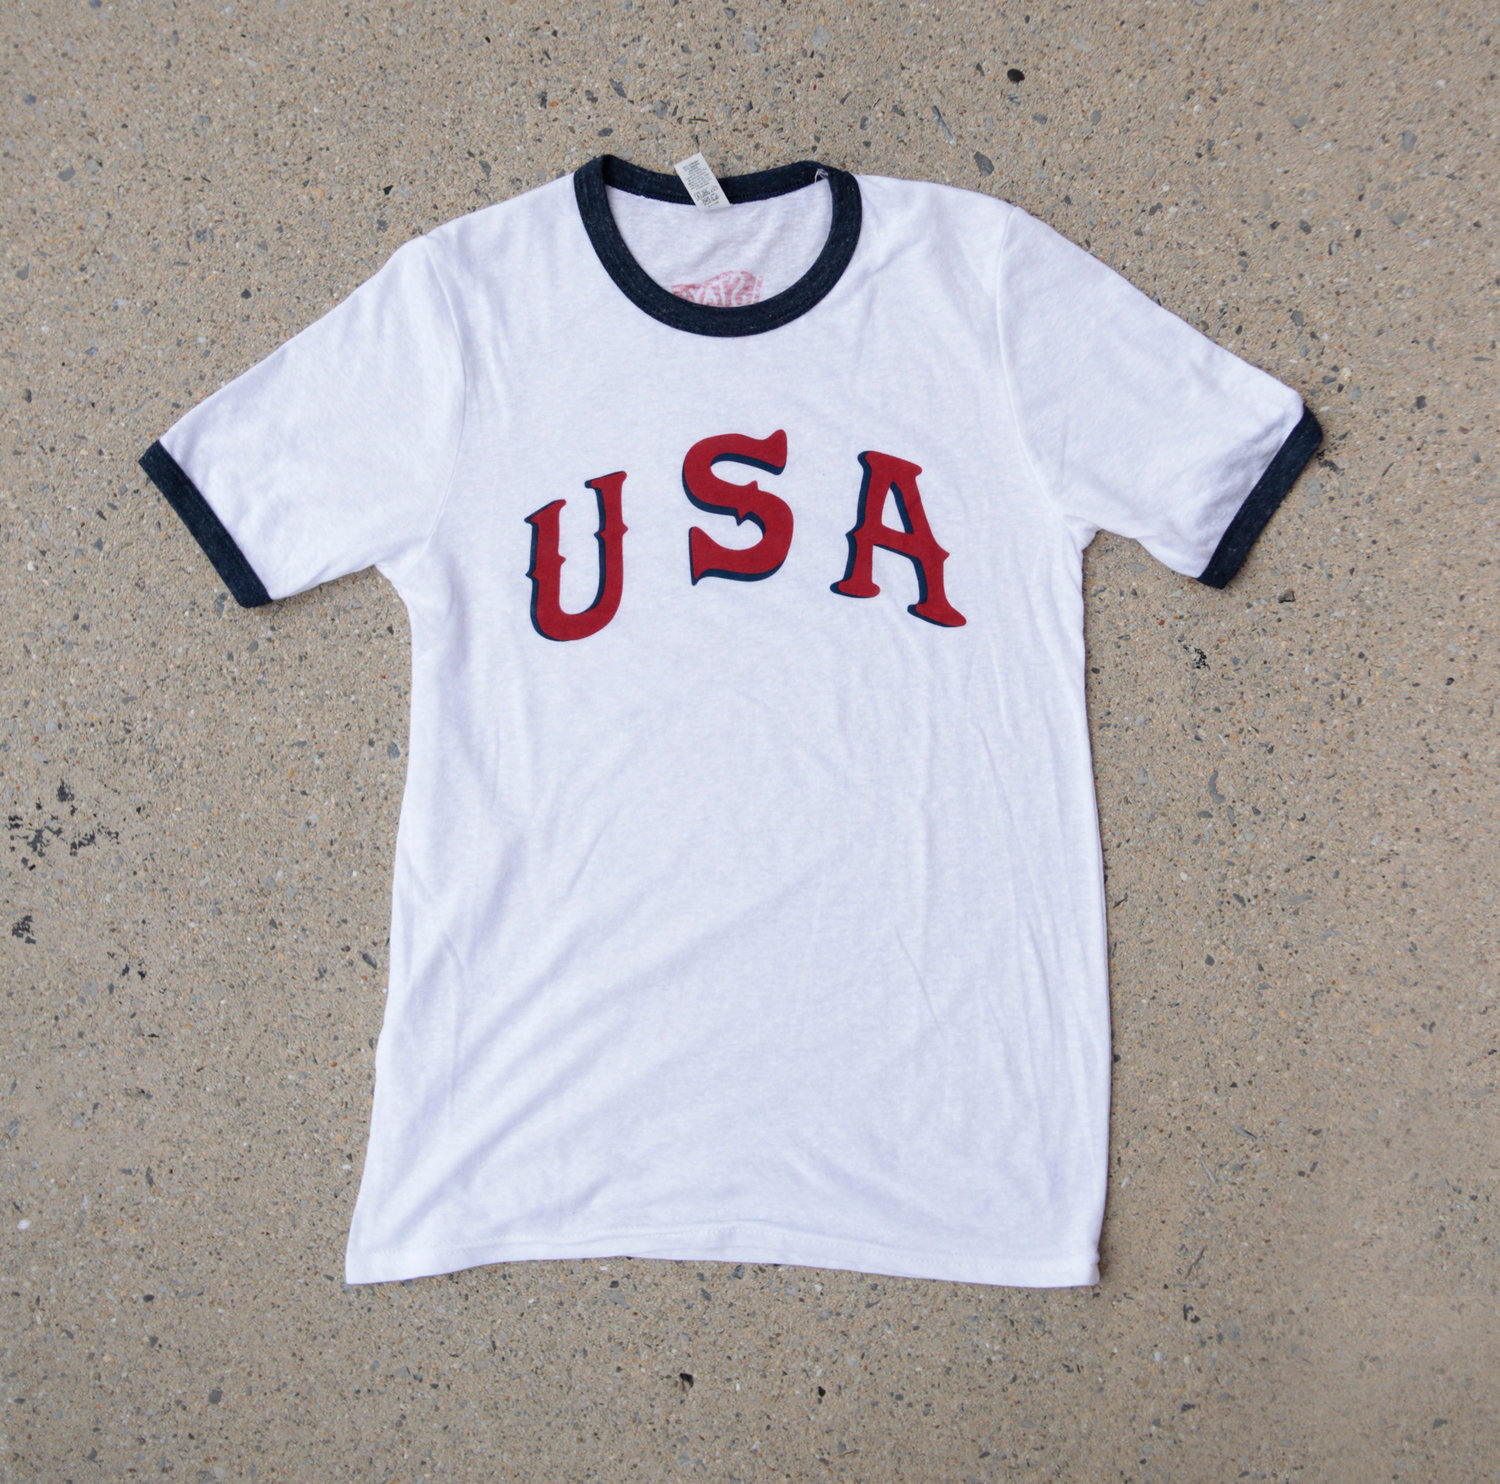 USA Tee | Shop T Shirts in USA | Stay